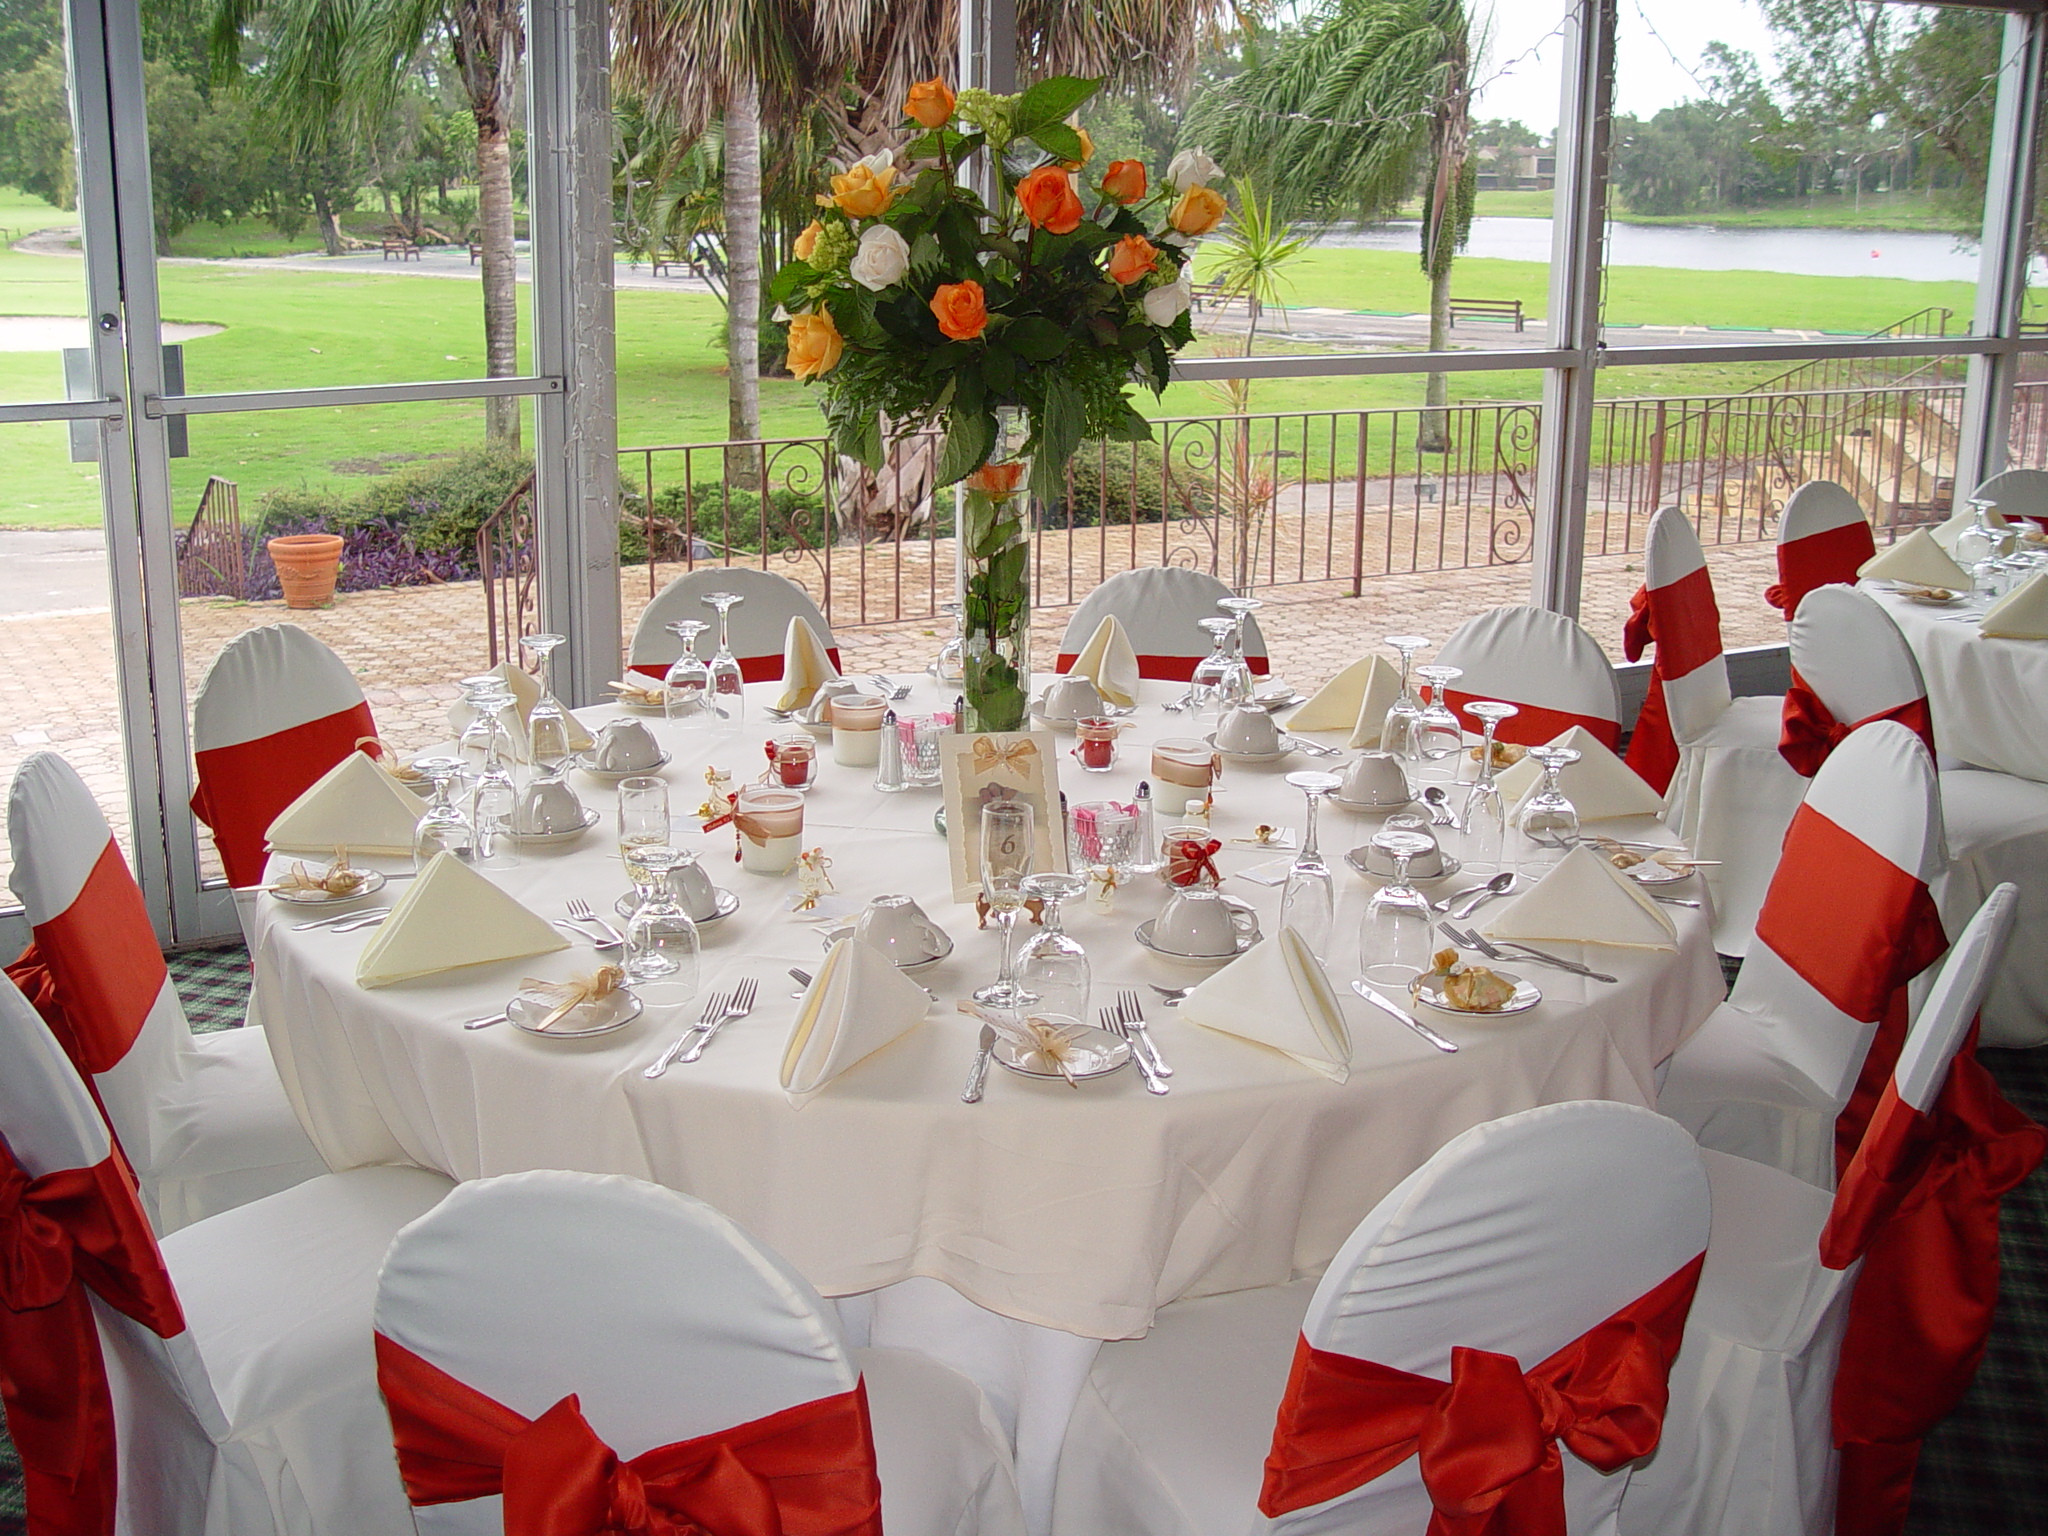 Table Decorations For Wedding Reception
 WEDDING DESIGN Elegant Wedding Reception Decorations